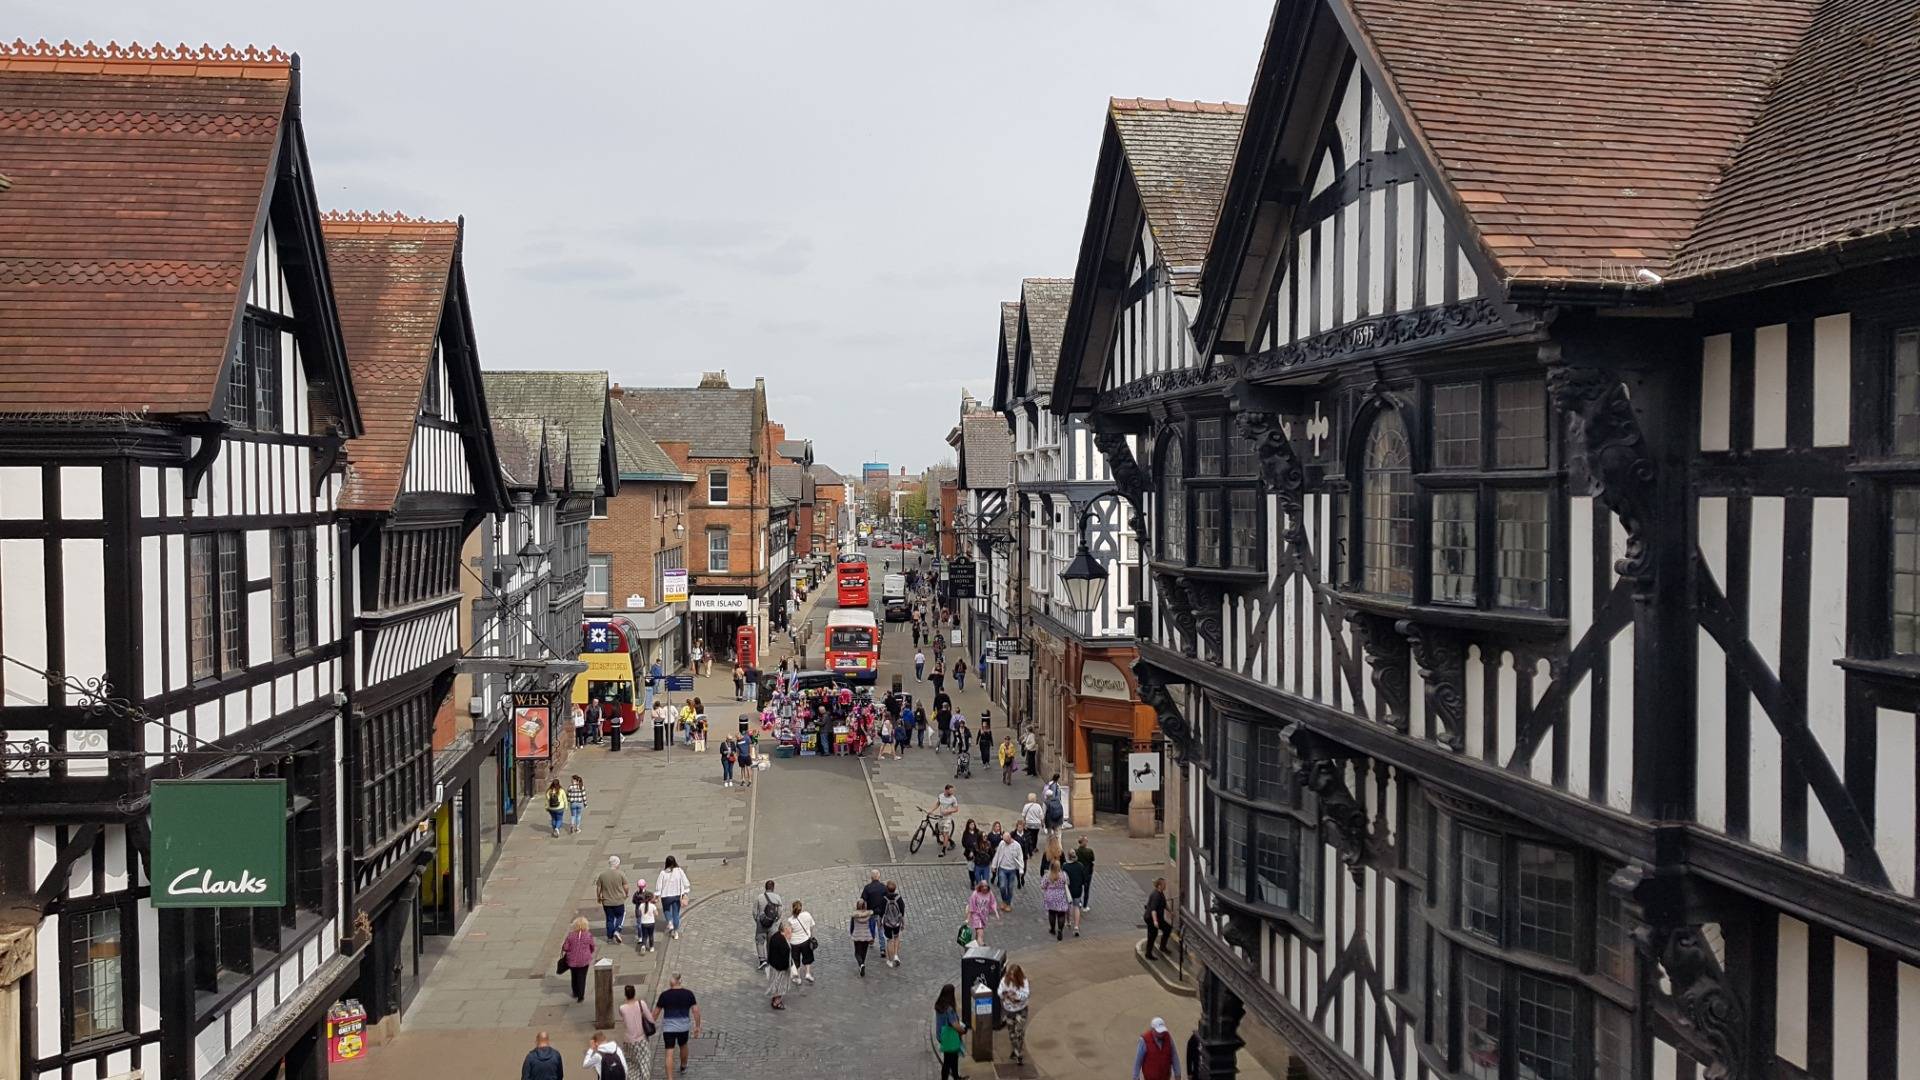 Chester’s classic medieval timber frame buildings.